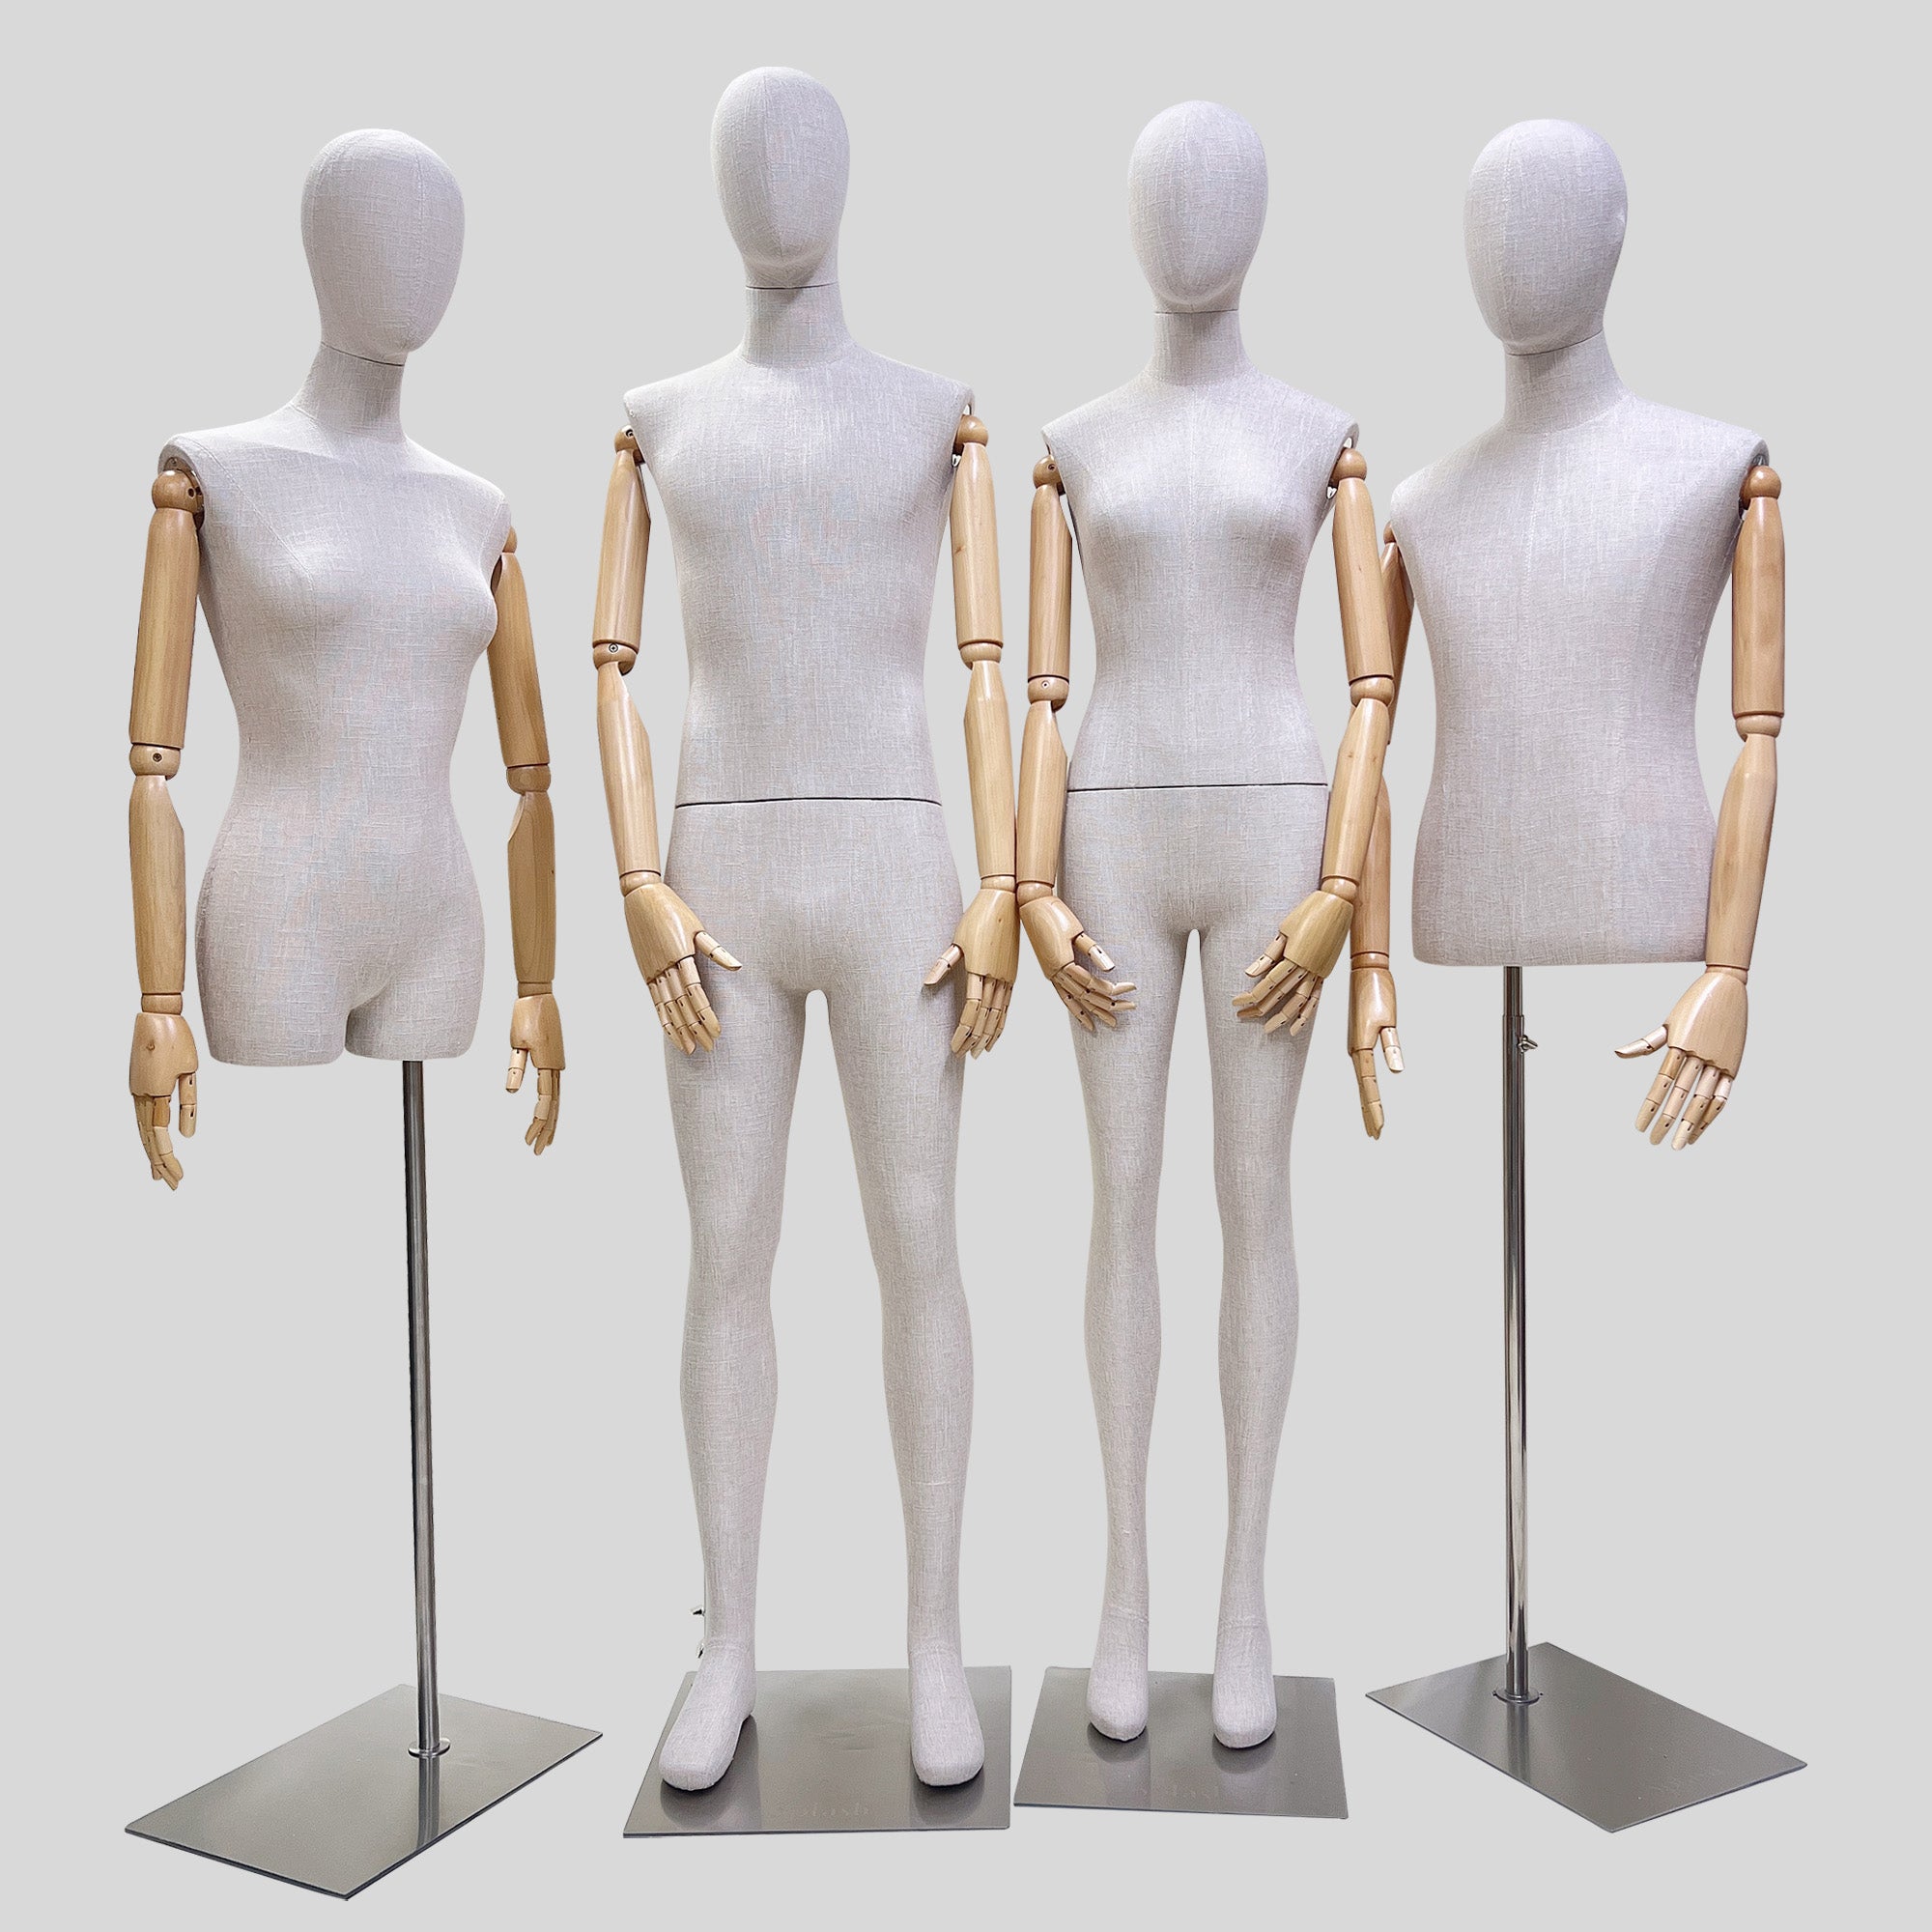 Flexible Wooden Hand Full Body The Mannequin 2 For Men Fashionable And Hot  Sale From Best138, $199.24